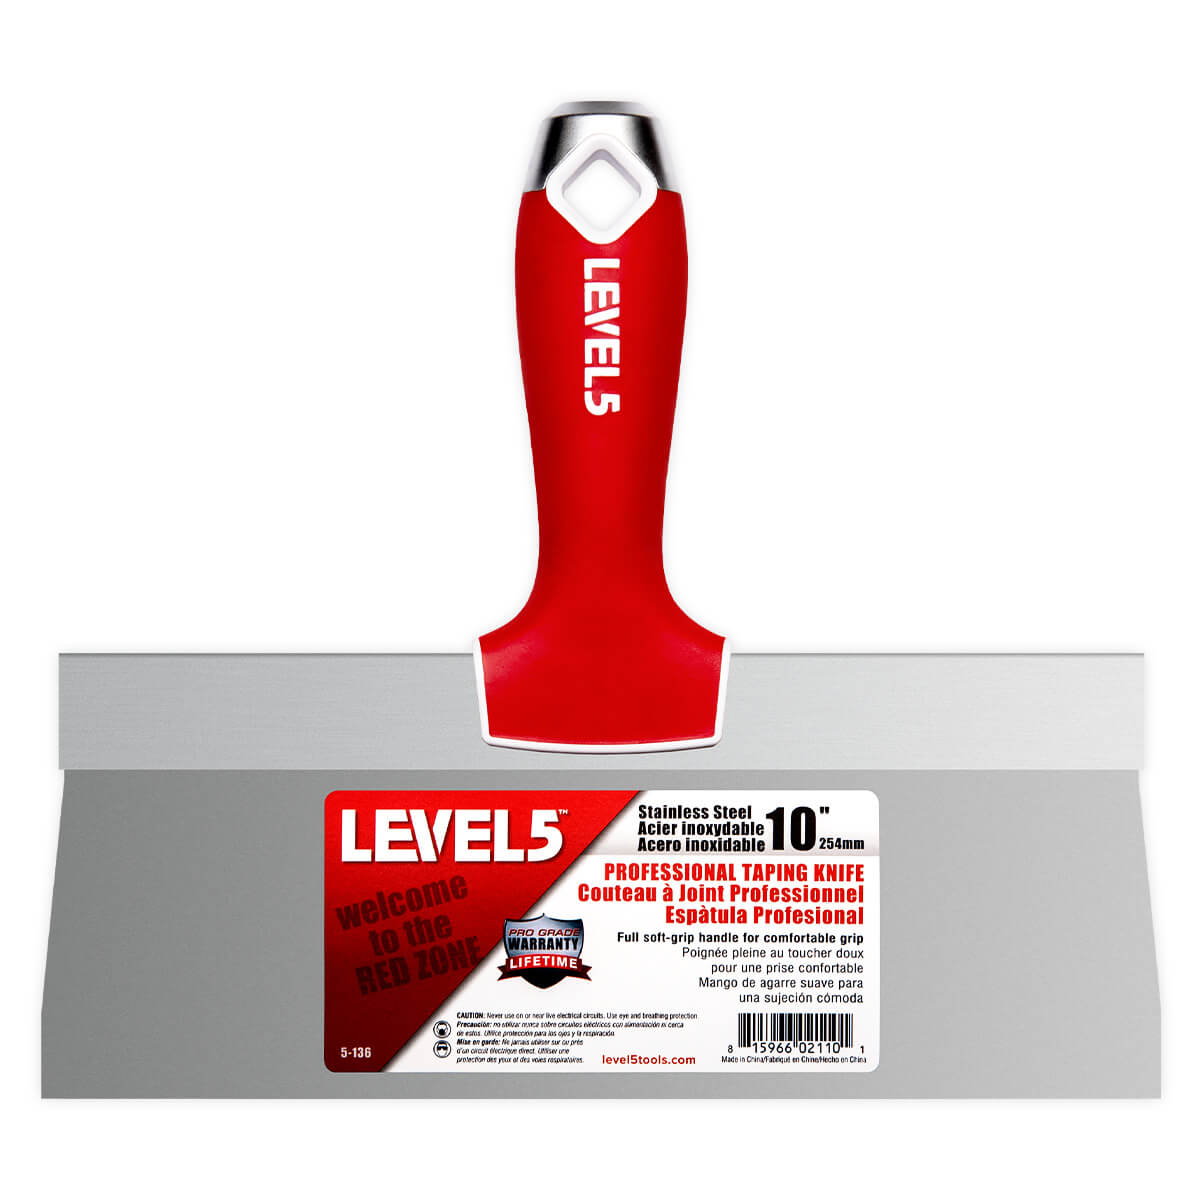 LEVEL5 10-INCH STAINLESS STEEL TAPING KNIFE | SOFT GRIP | 5-136